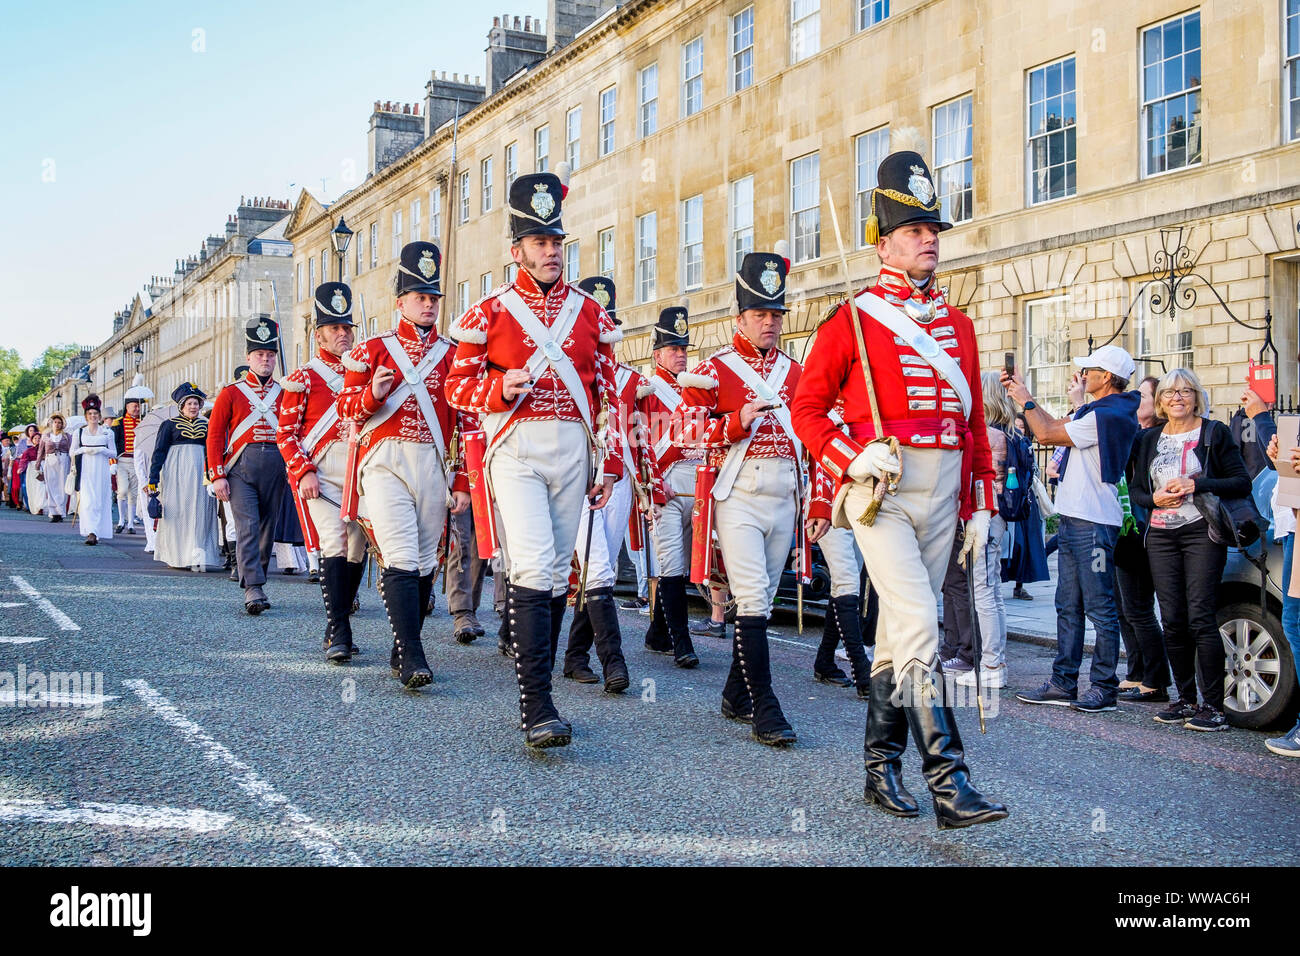 Bath, Somerset, UK. 14th Sep, 2019. Members of the re-enactment group, His Majesty's 33rd Regiment of Foot are pictured marching along Great Pulteney Street as they take part in the world famous Grand Regency Costumed Promenade. The Promenade, part of the 10 day Jane Austen Festival is a procession through the streets of Bath and the participants who come from all over the world dress in 18th Century costume. Credit: lynchpics/Alamy Live News Stock Photo